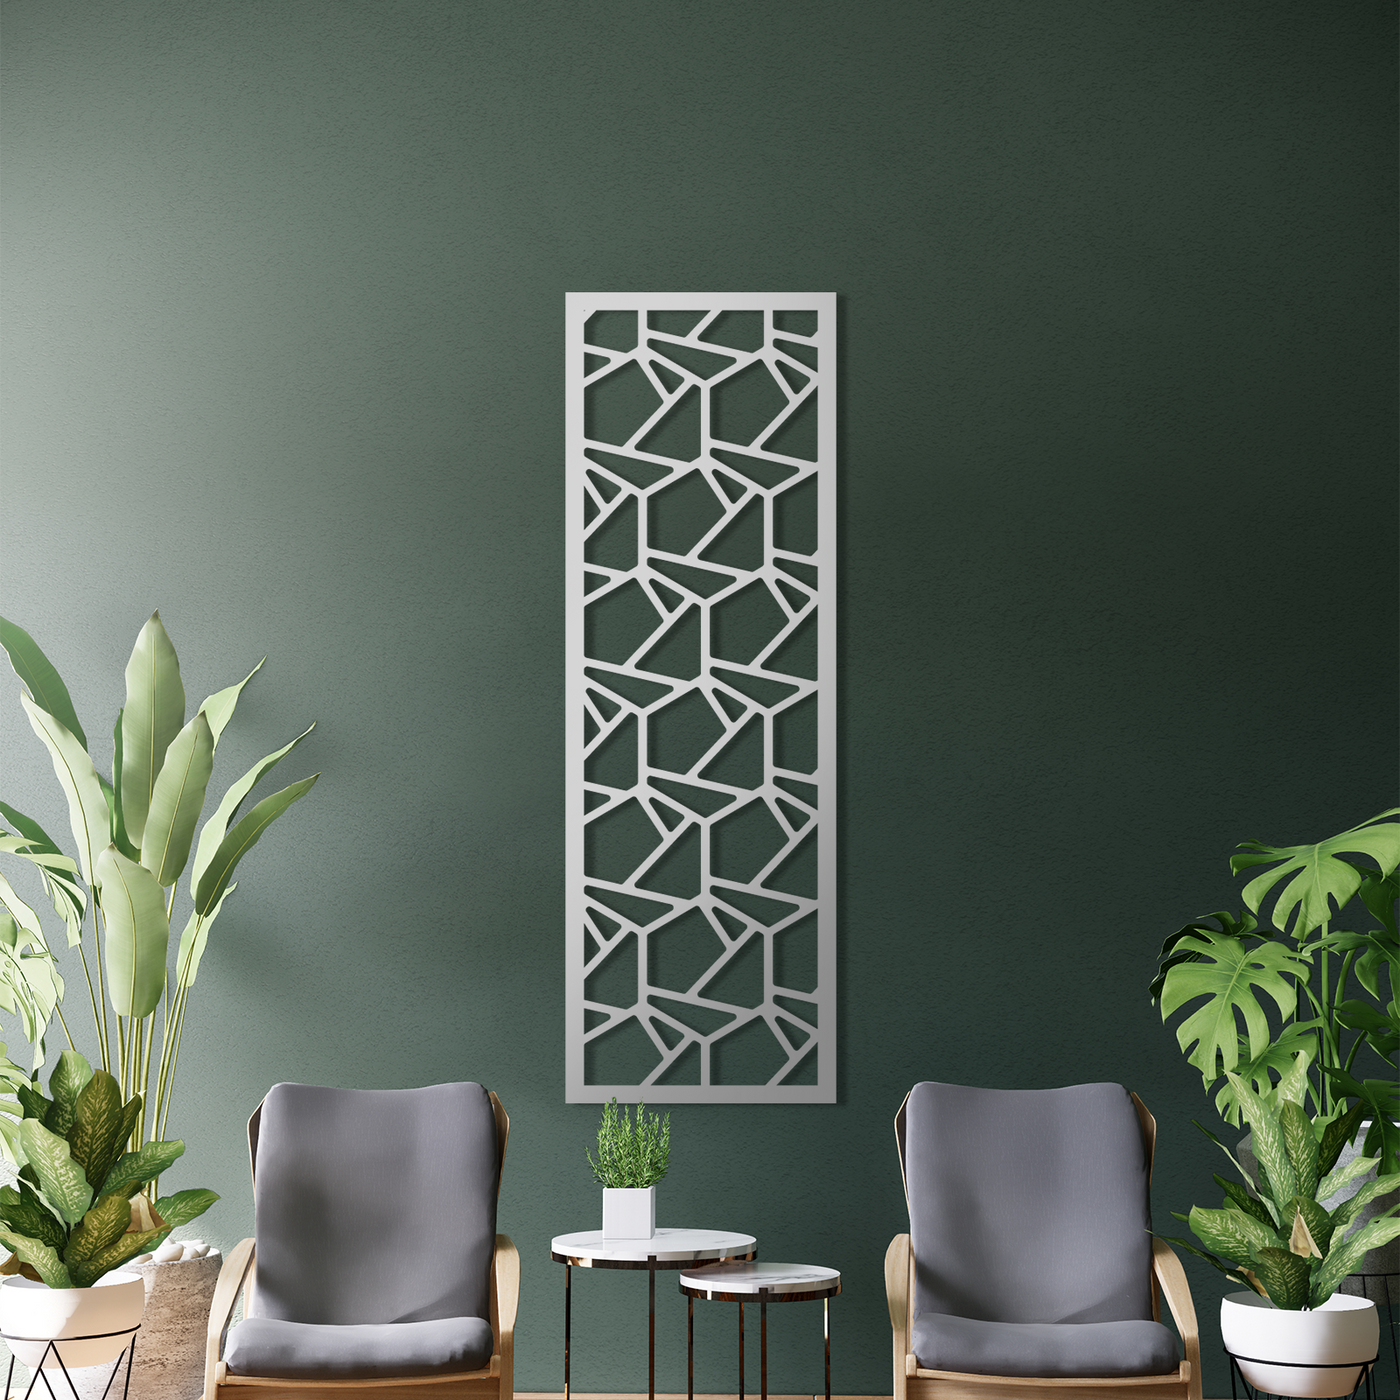 Hexapanel Metal Garden Screen: Quality You Can Count On